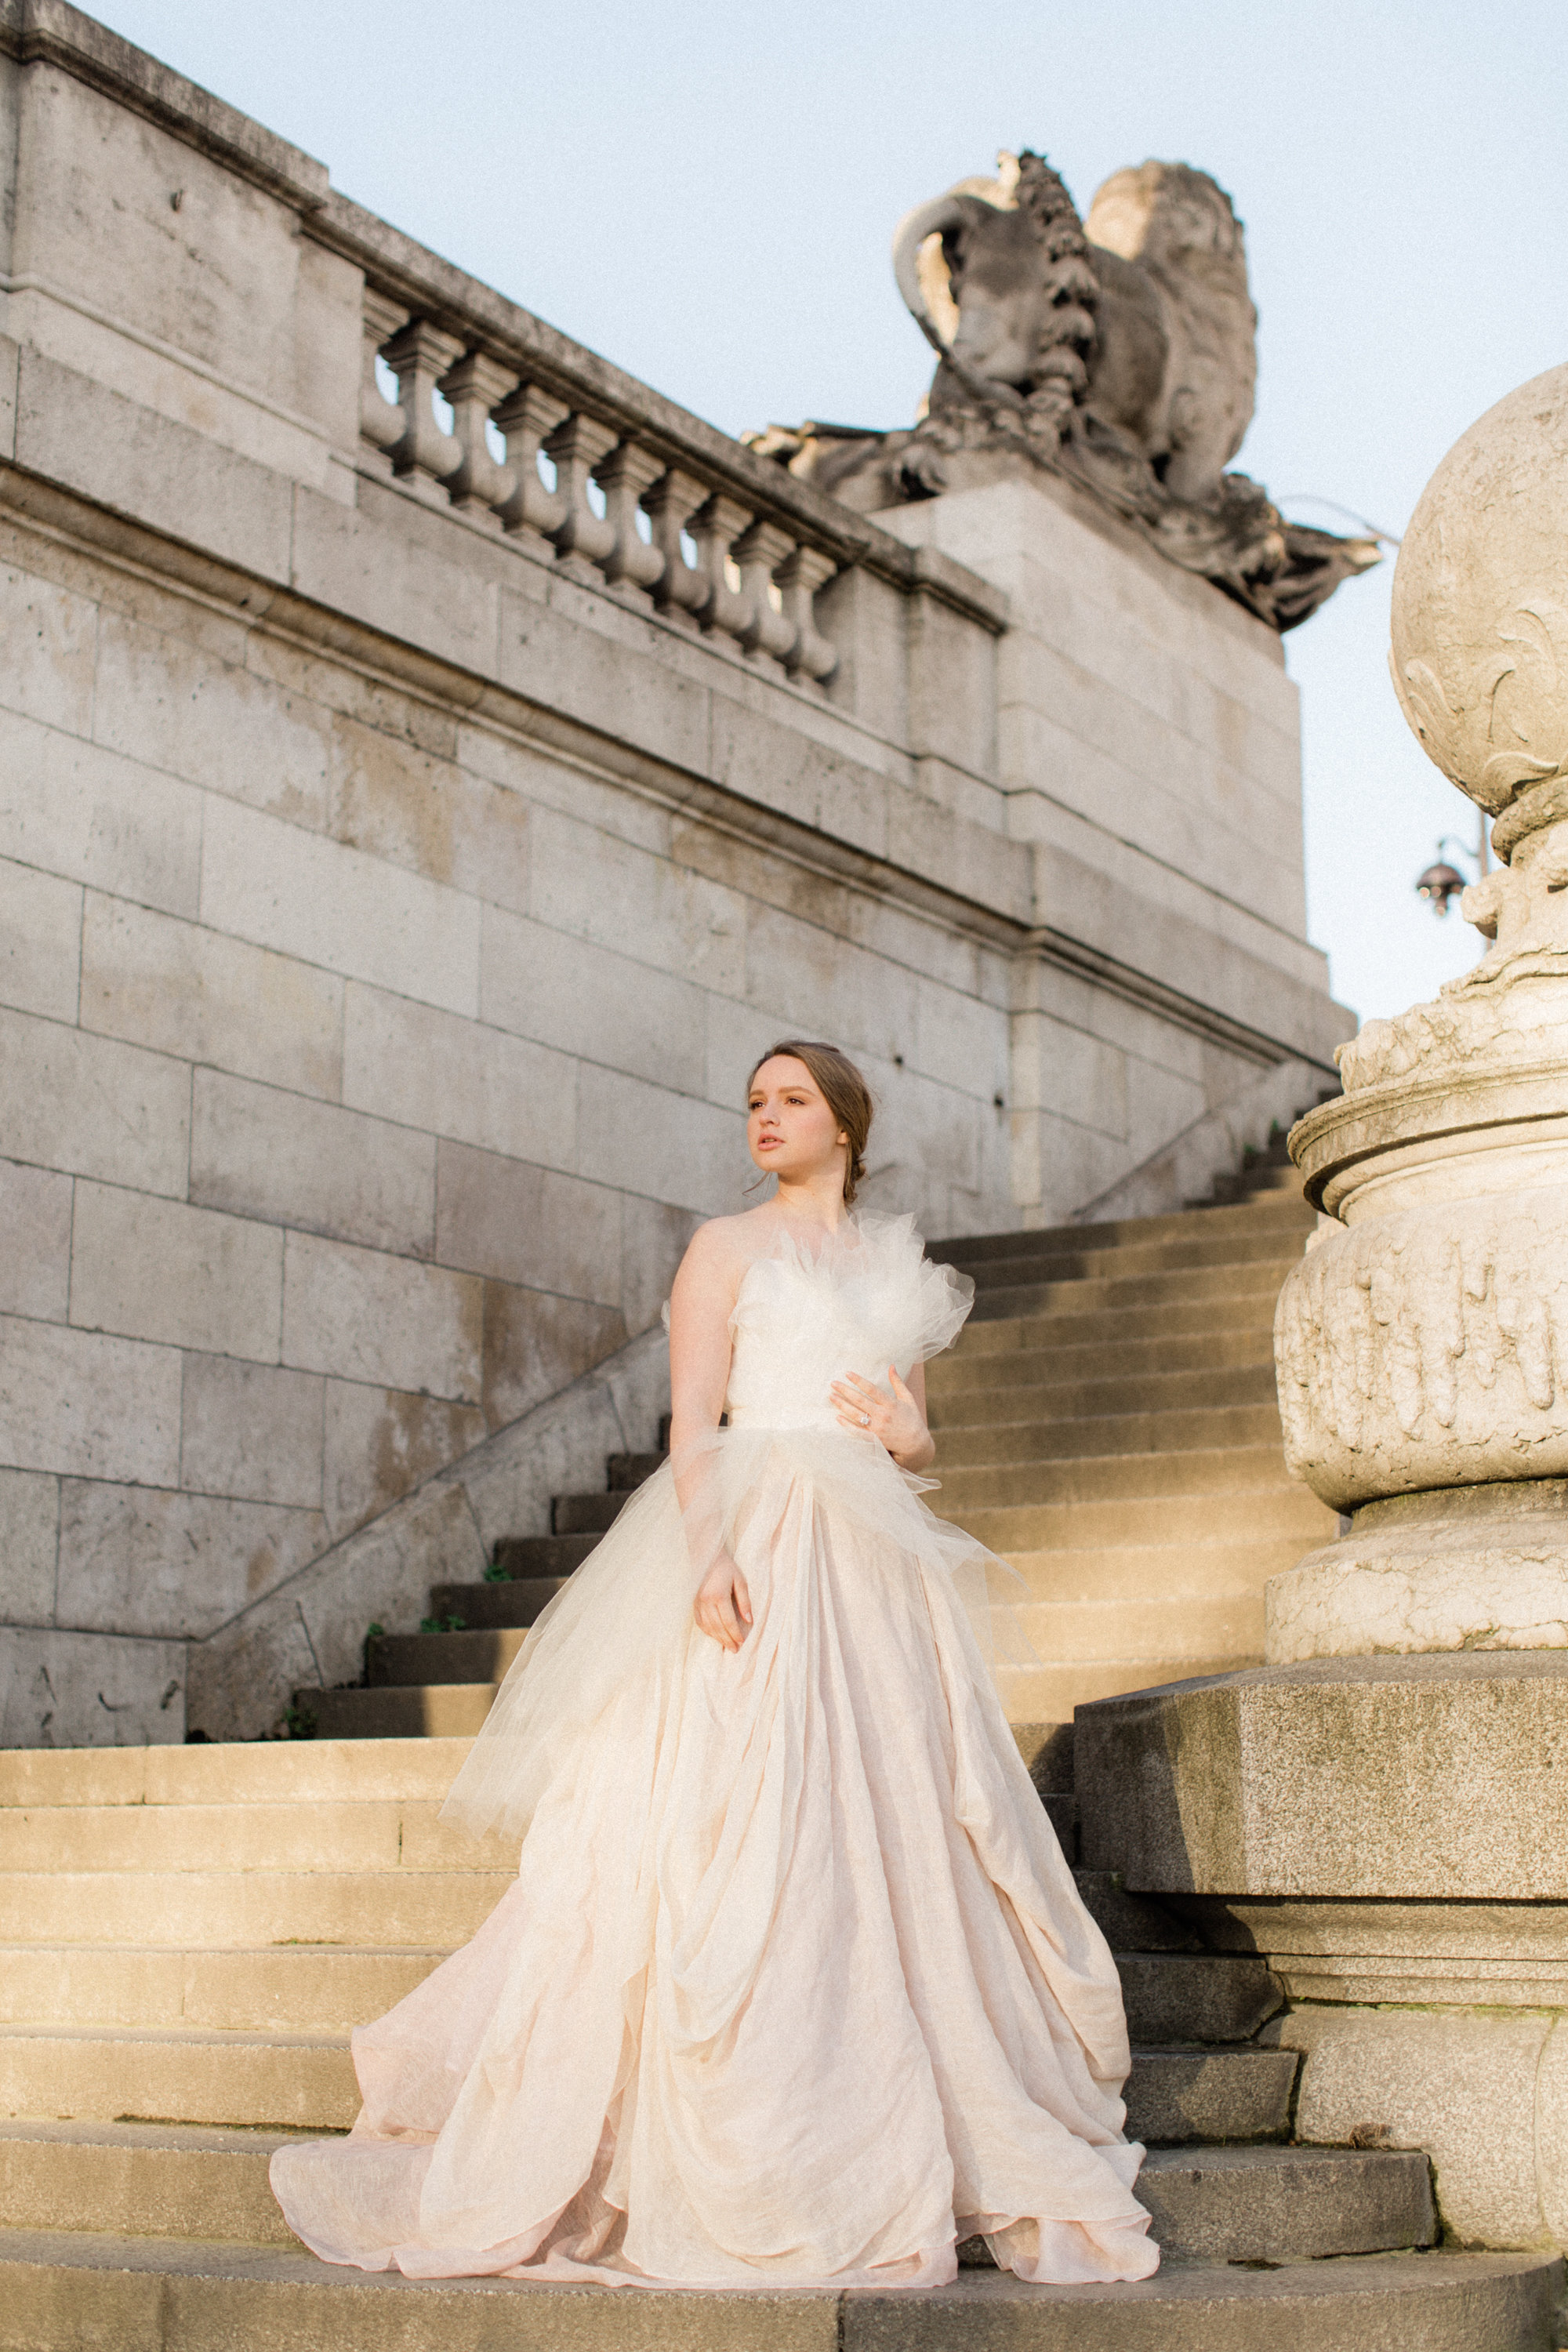 Grand palais wedding gown blush and tulle4.jpg